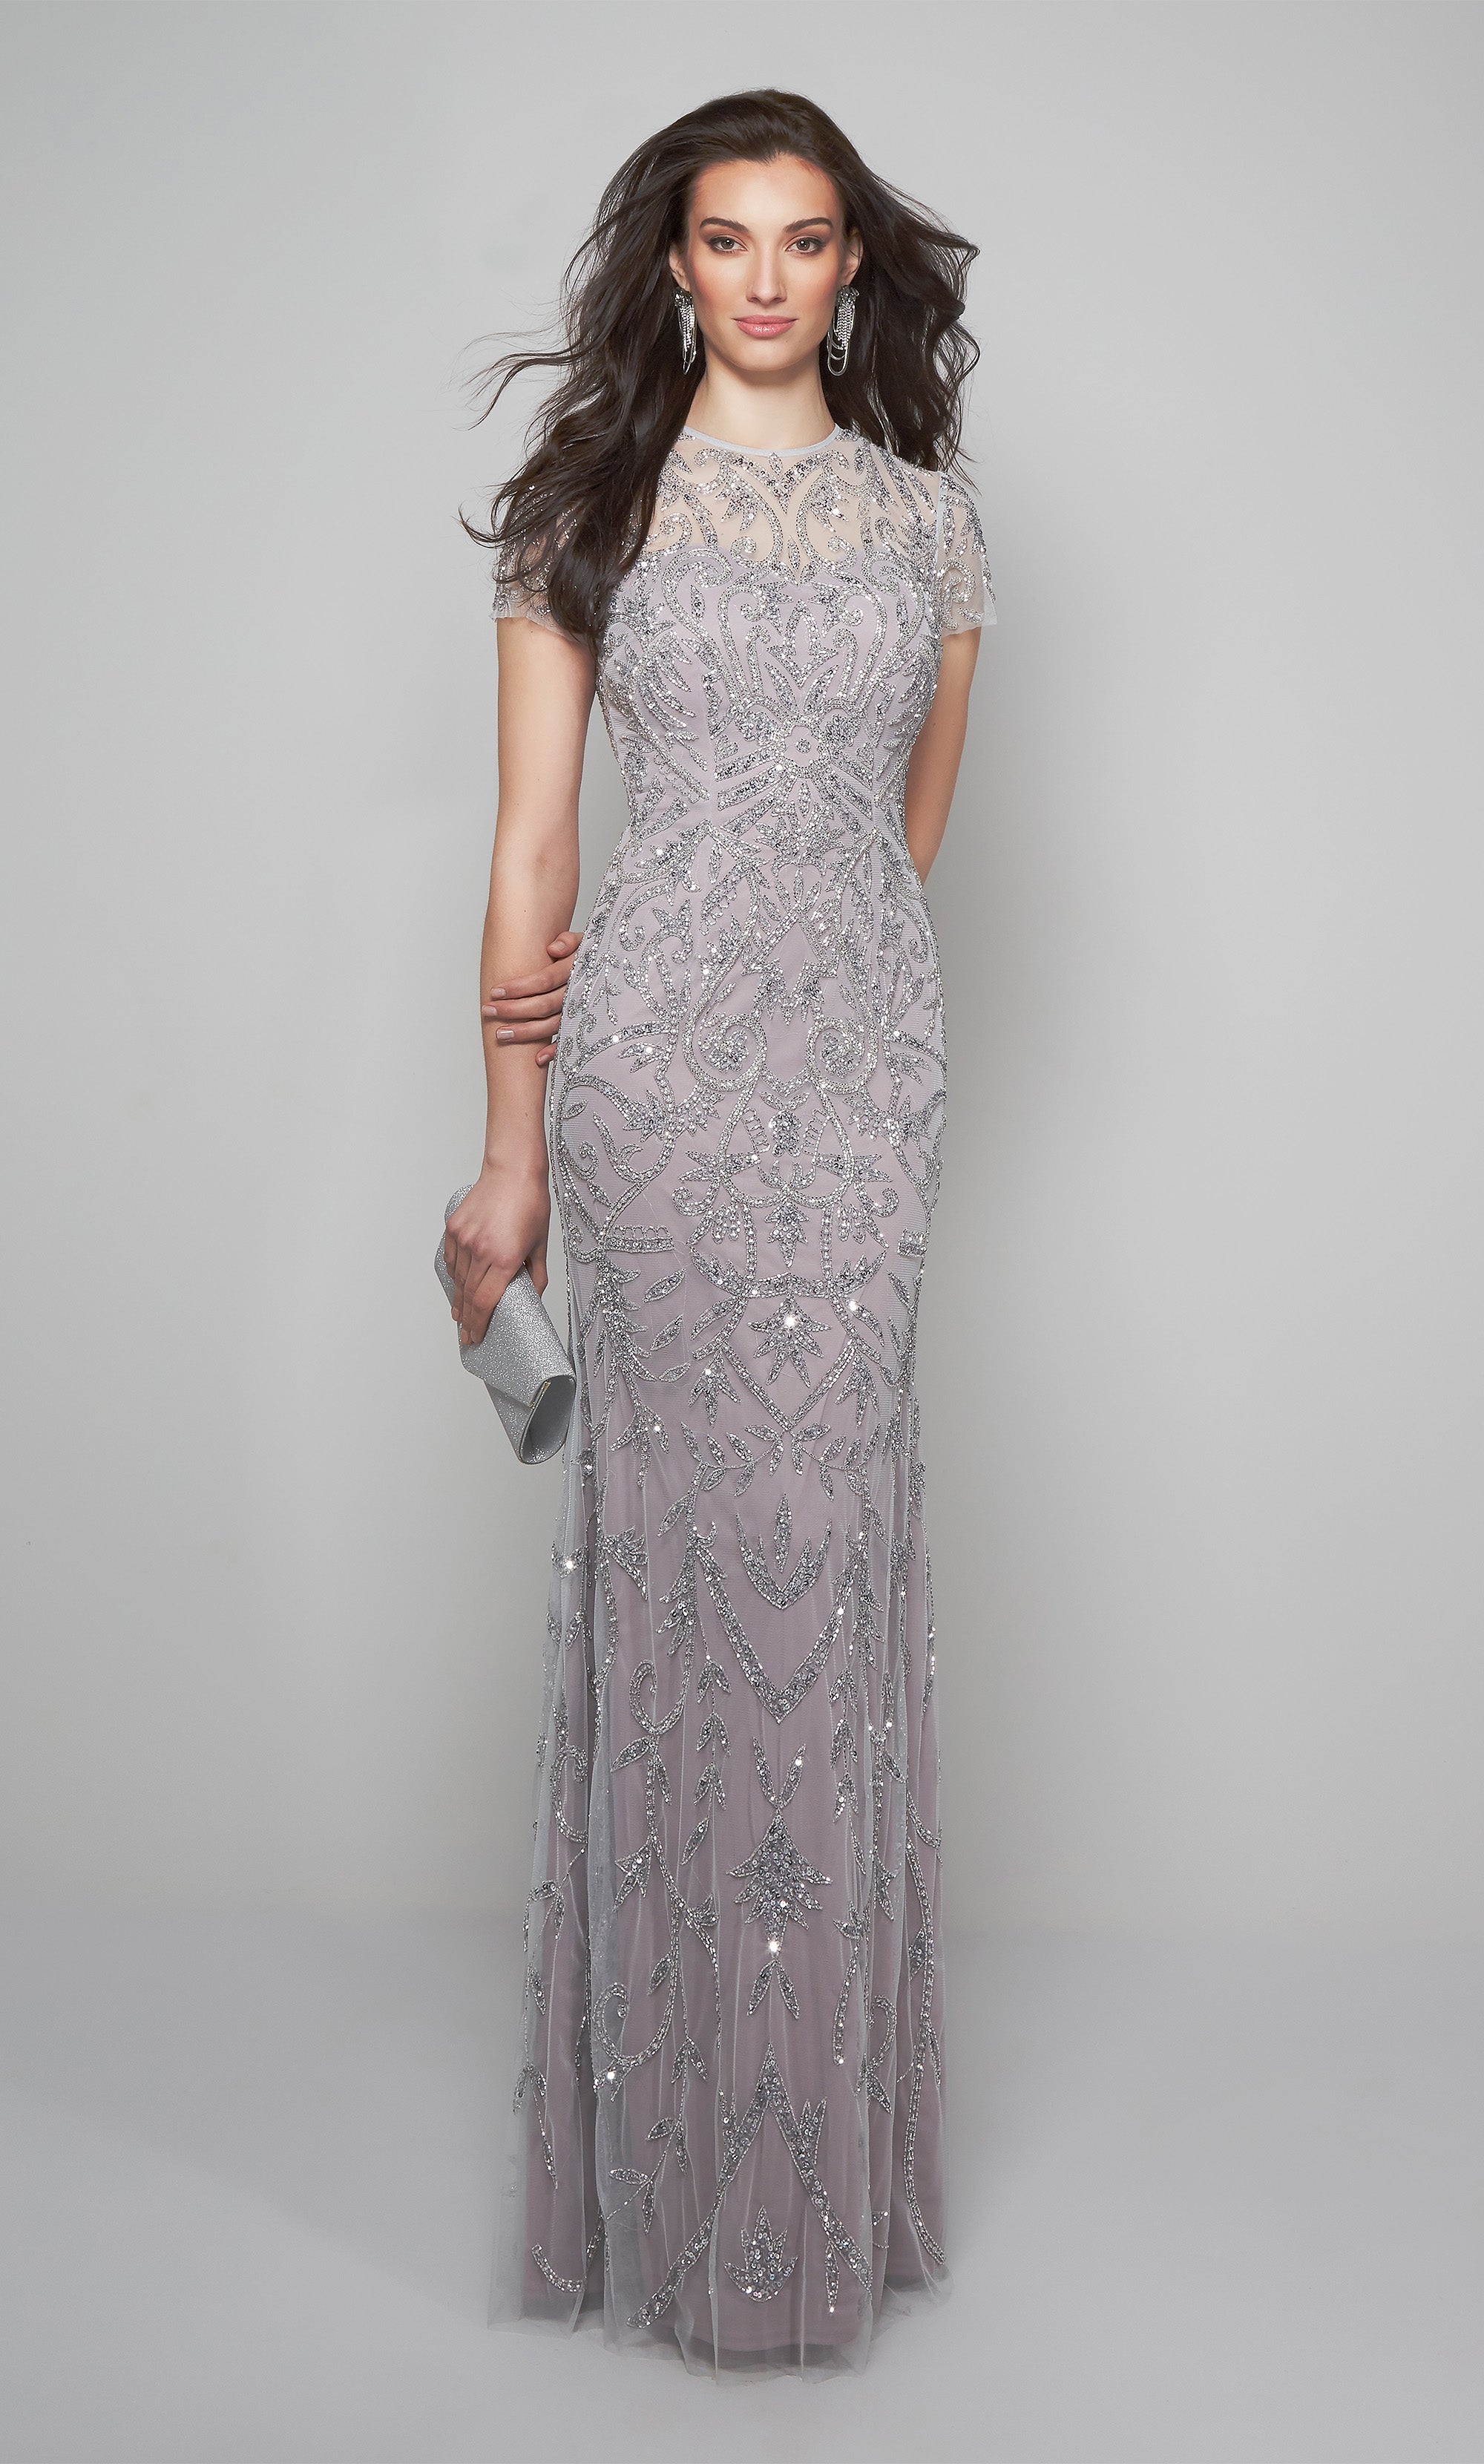 Fit and flare beaded formal dress with an illusion high neckline and short sleeves.